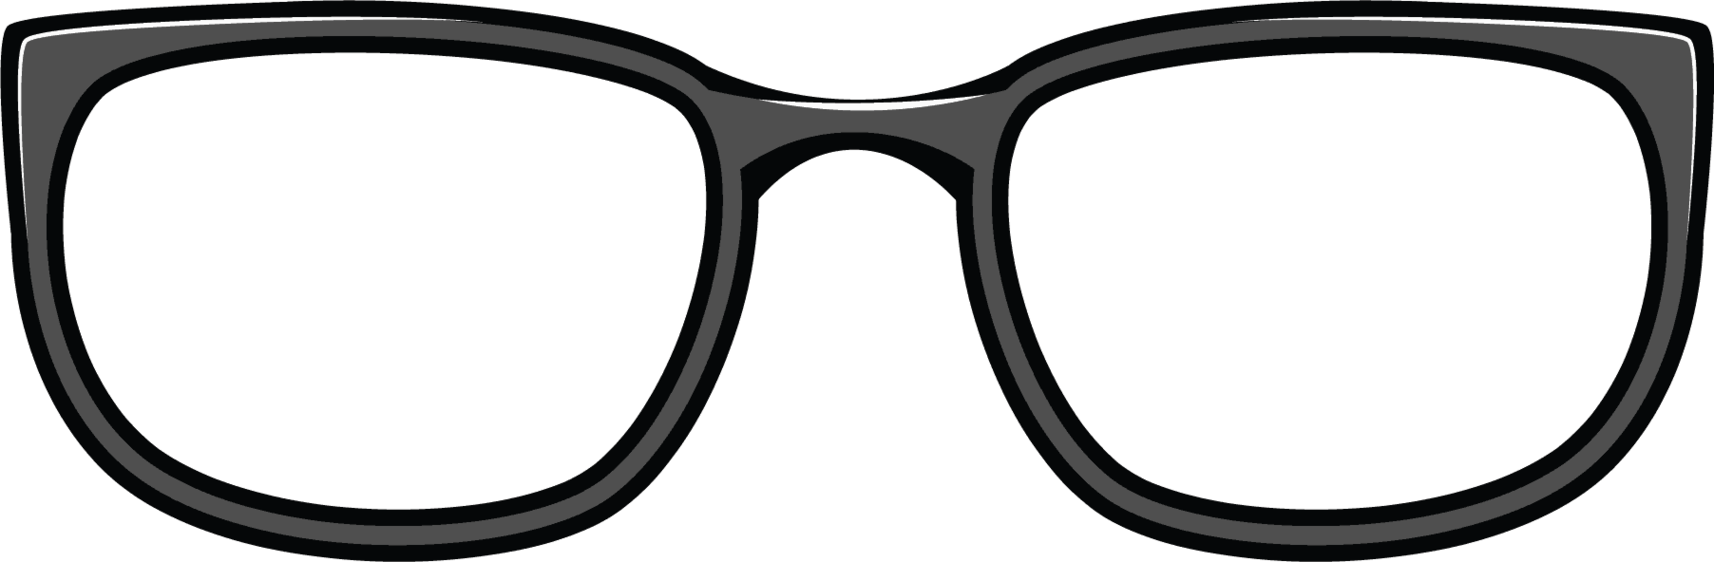 clip art pictures of eyeglasses - photo #41